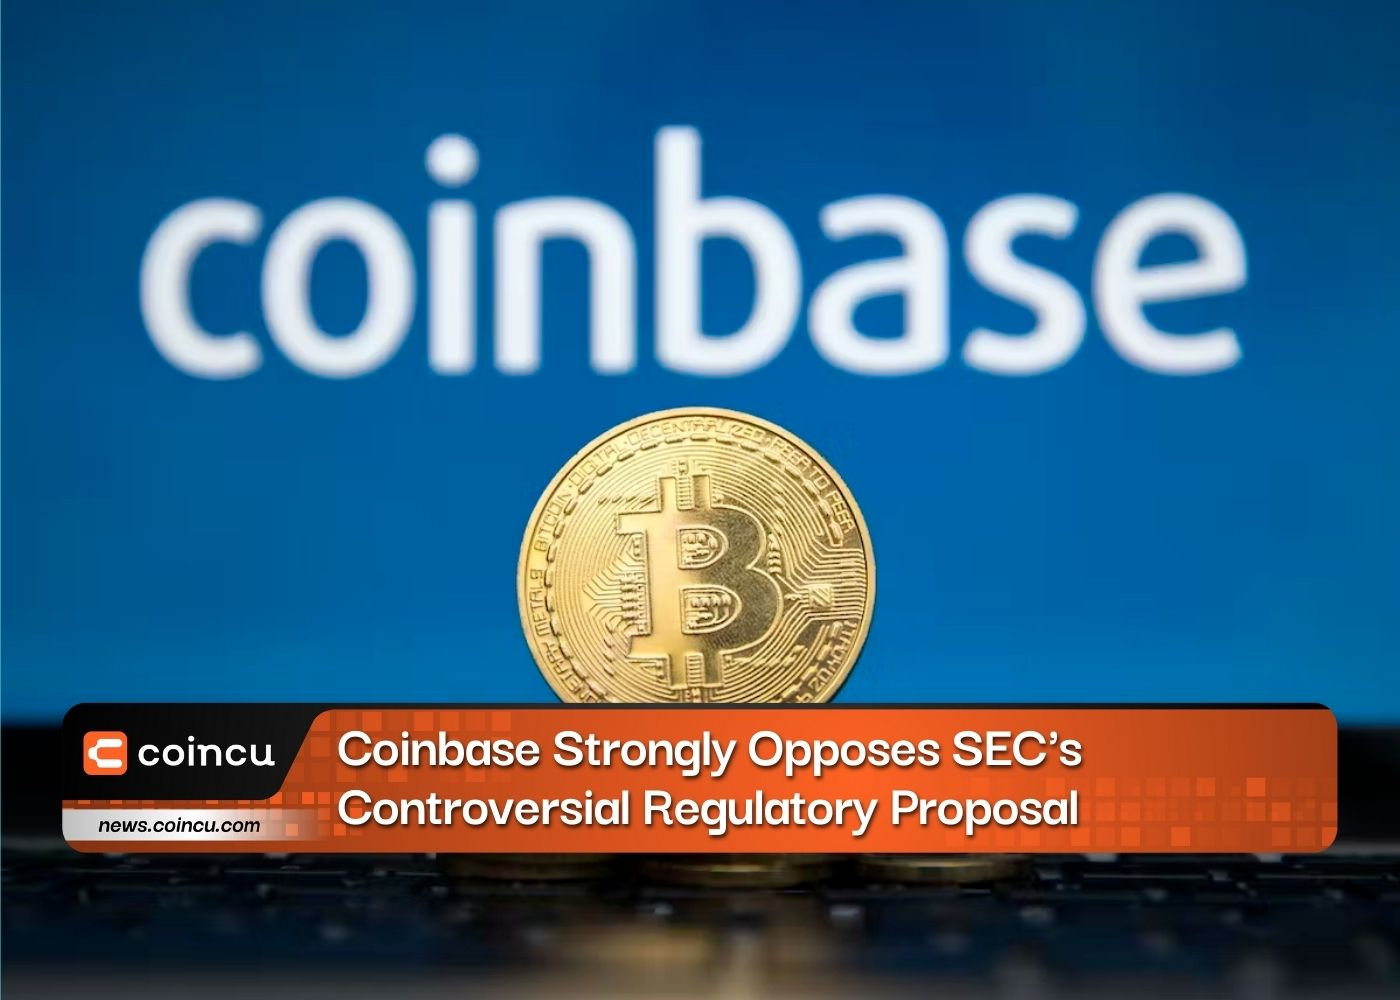 Coinbase Strongly Opposes SEC's Controversial Regulatory Proposal